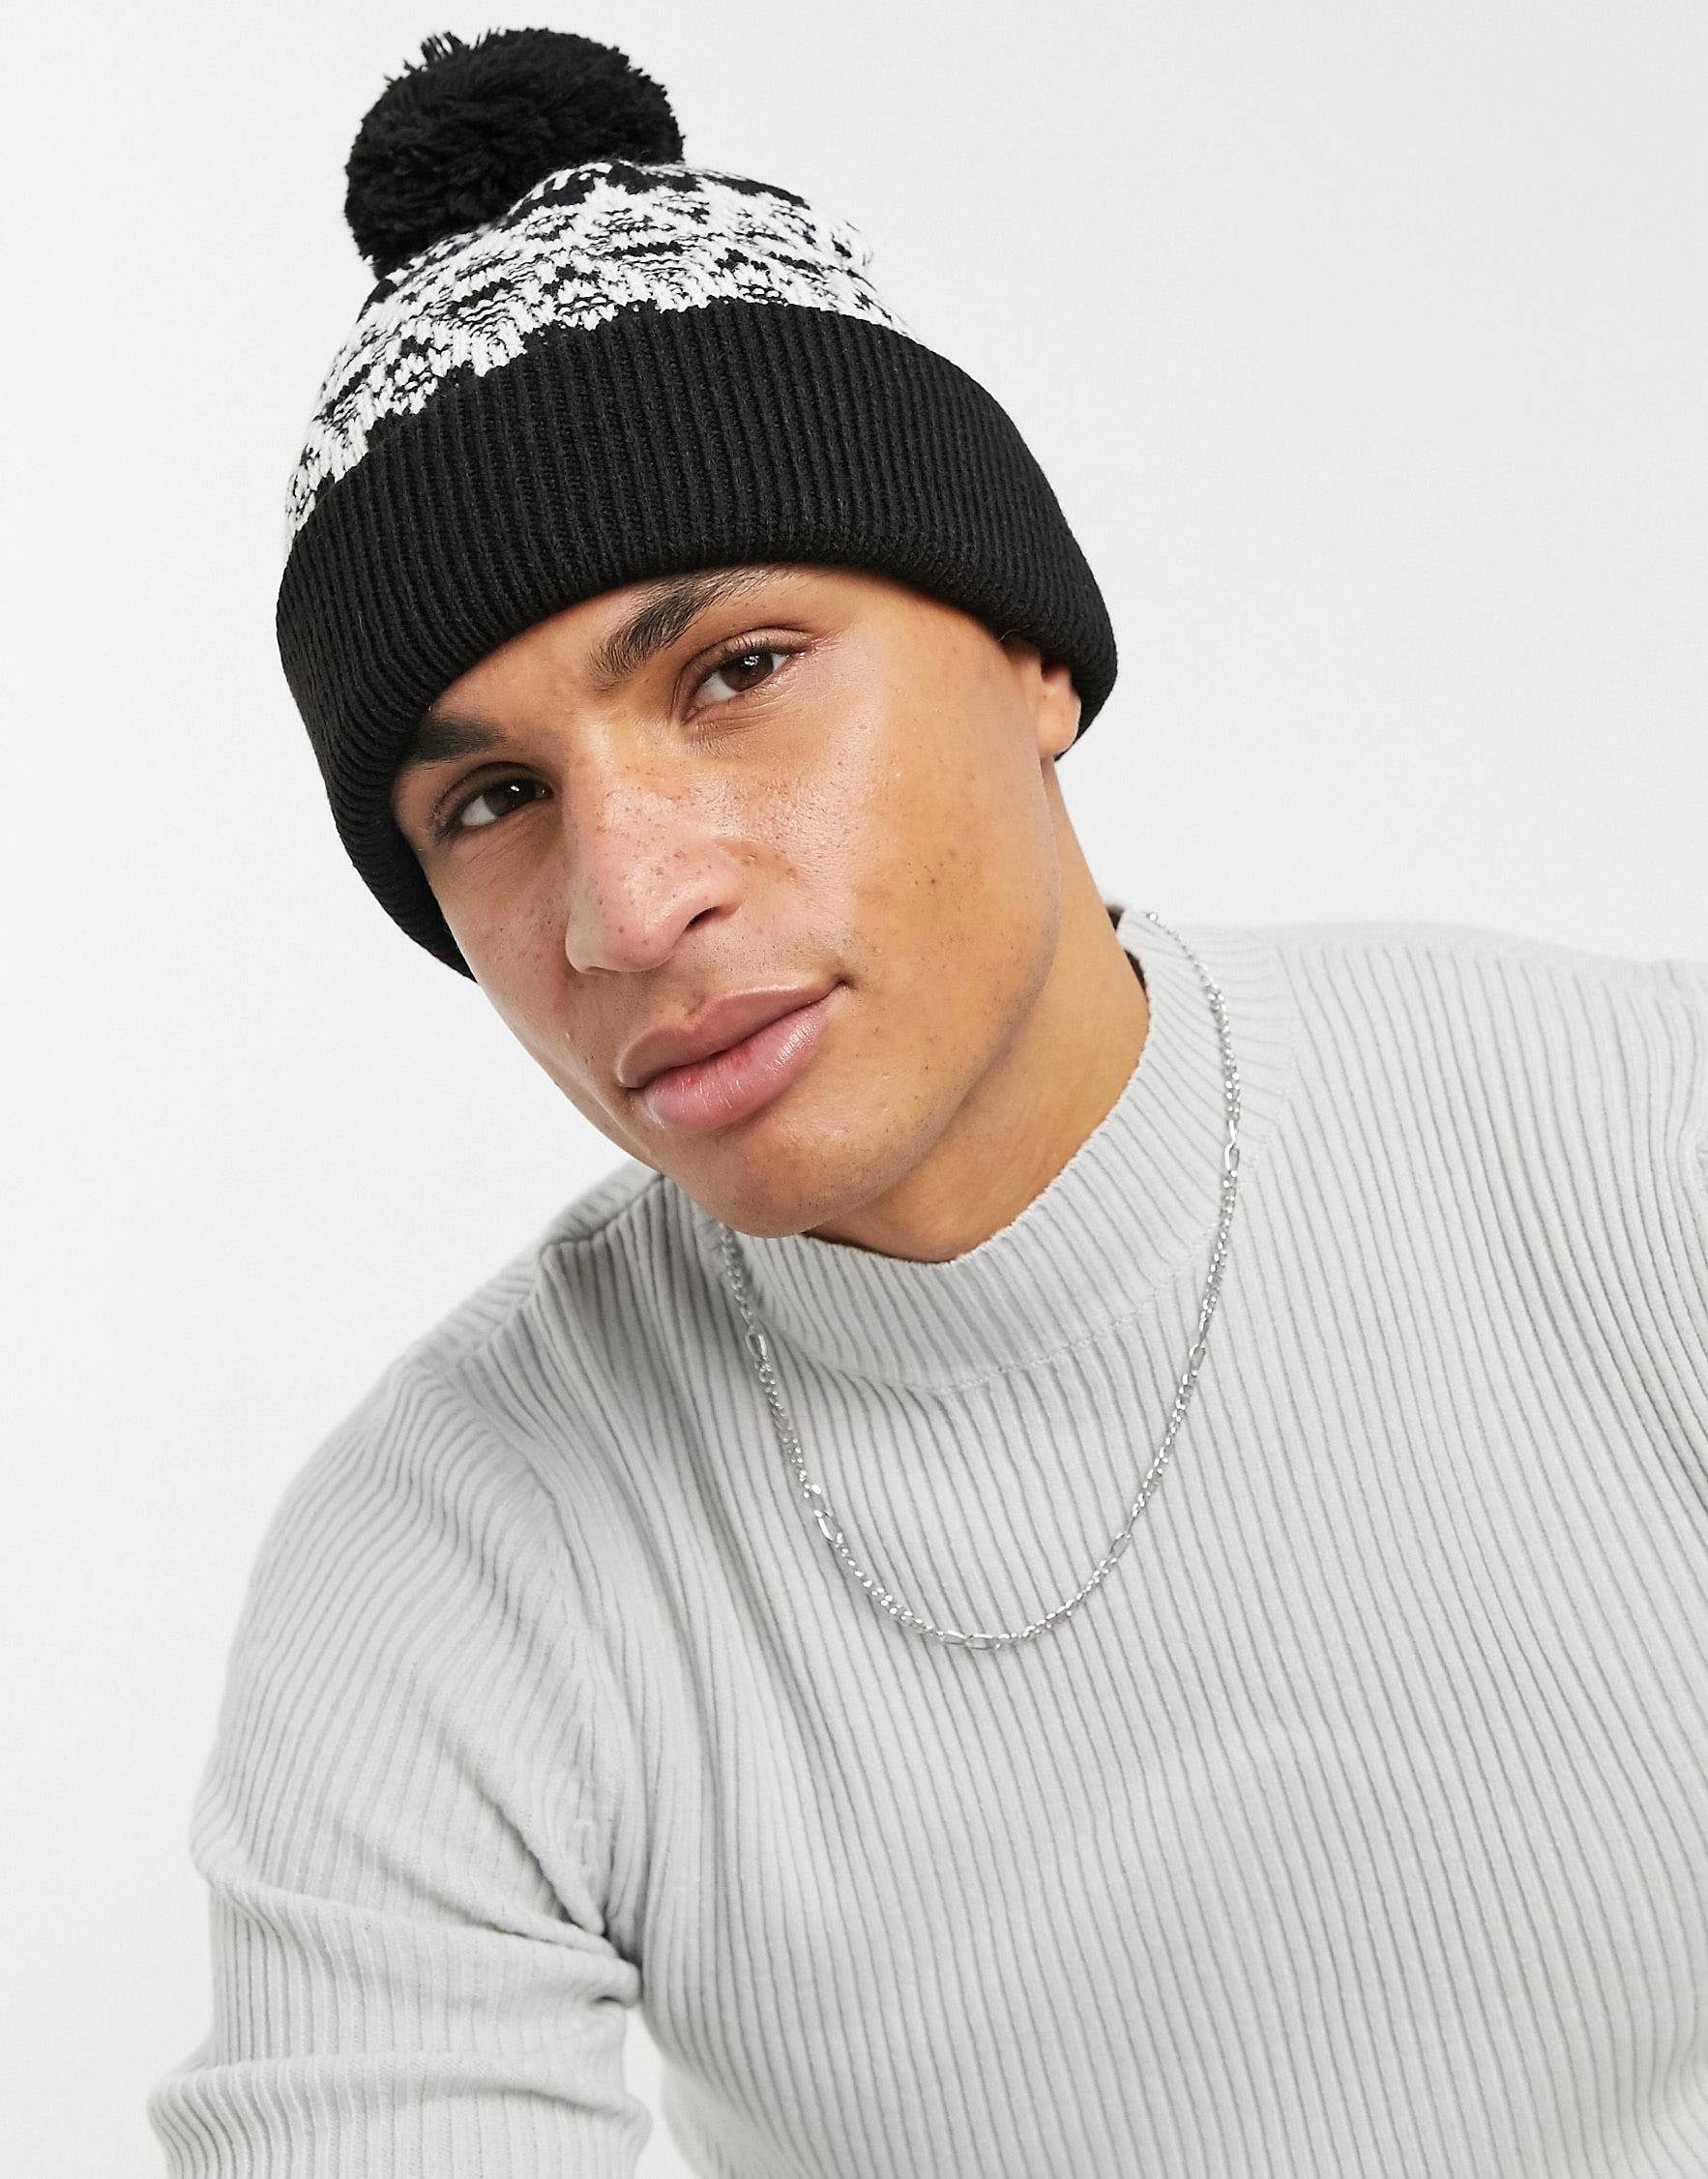 Topman bobble hat with fair isle print in black and white